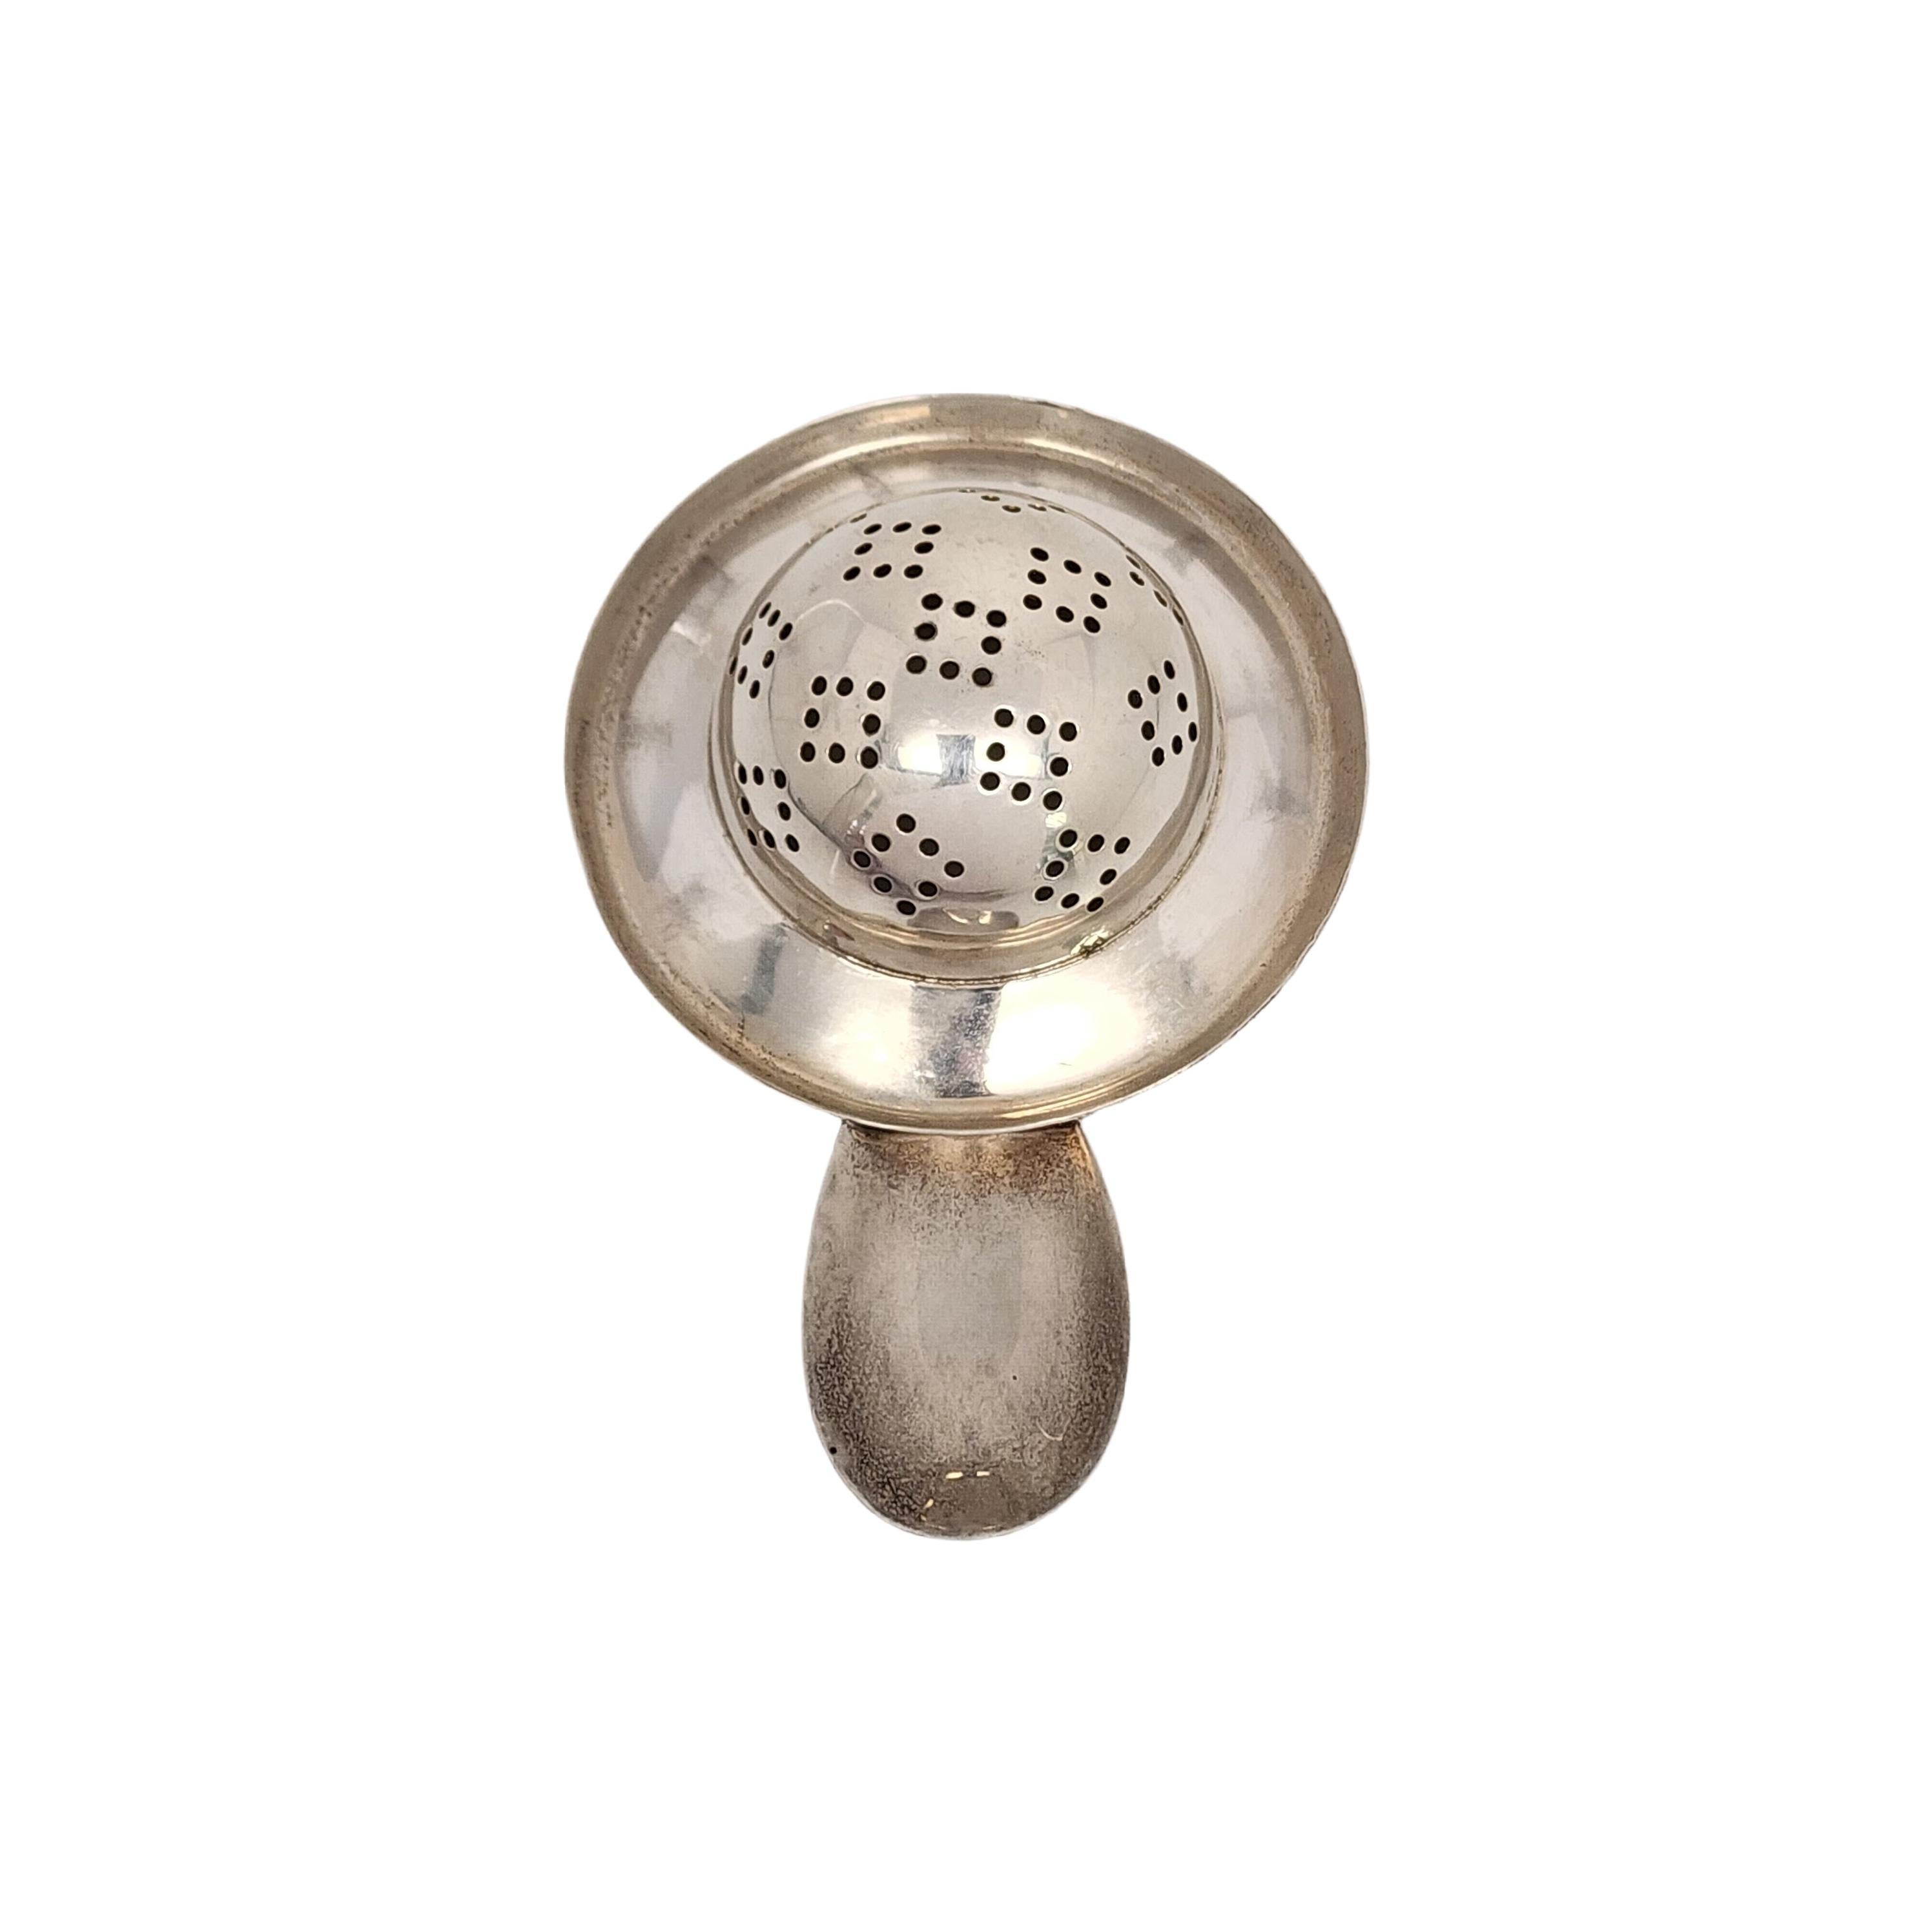 Mexican sterling silver gold wash bowl tea strainer.

No monogram

Simple and timeless design, a gold wash bowl with a short rounded handle.

Weighs approx 35.8g, 23.0dwt

4 1/8